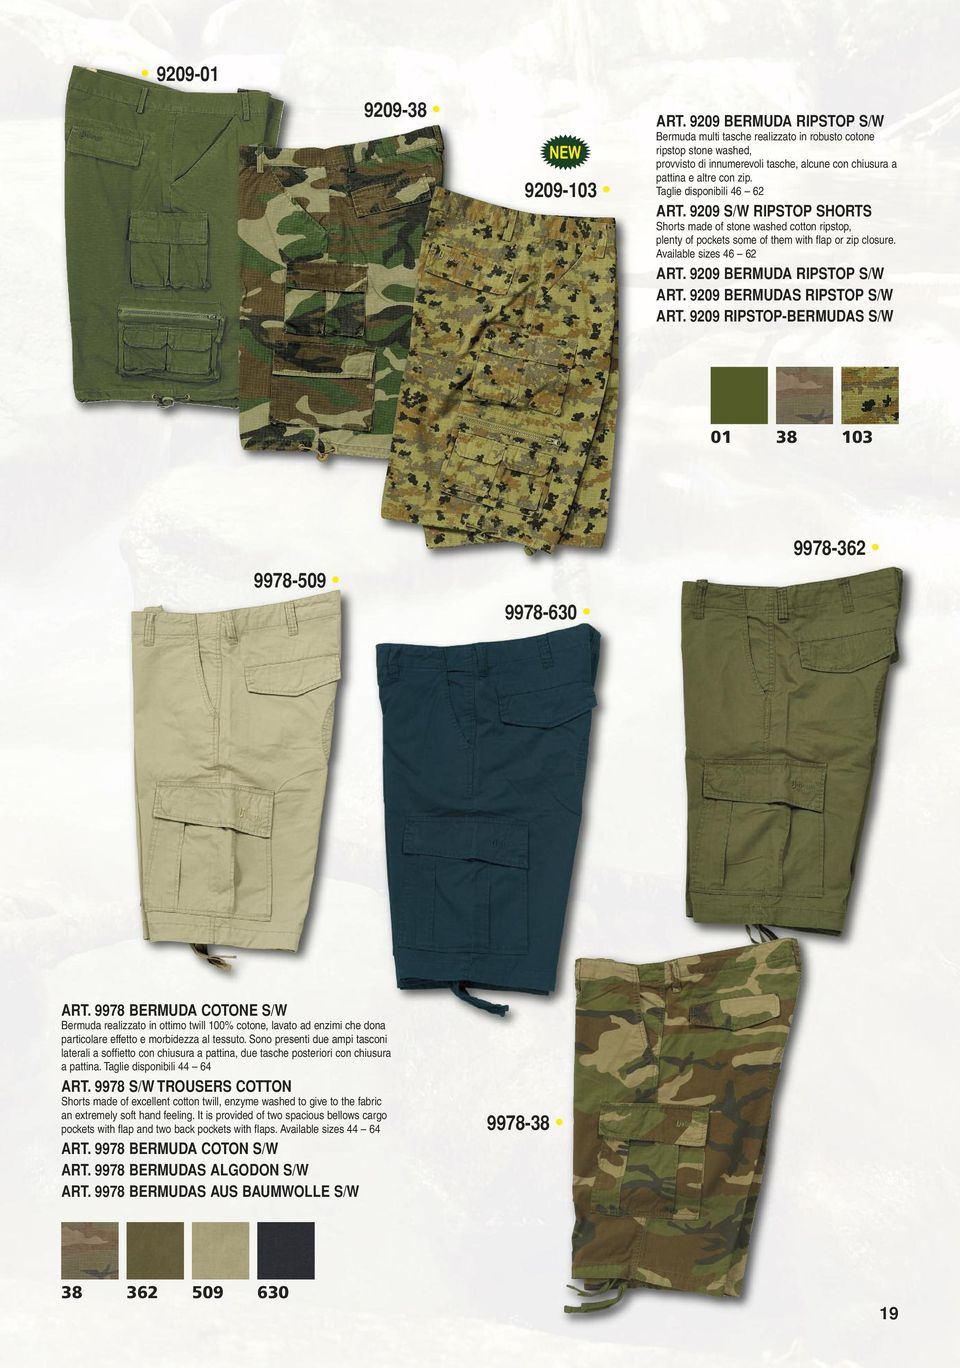 9209 S/W RIPSTOP SHORTS Shorts made of stone washed cotton ripstop, plenty of pockets some of them with flap or zip closure. Available sizes 46 62 ART. 9209 BERMUDA RIPSTOP S/W ART.